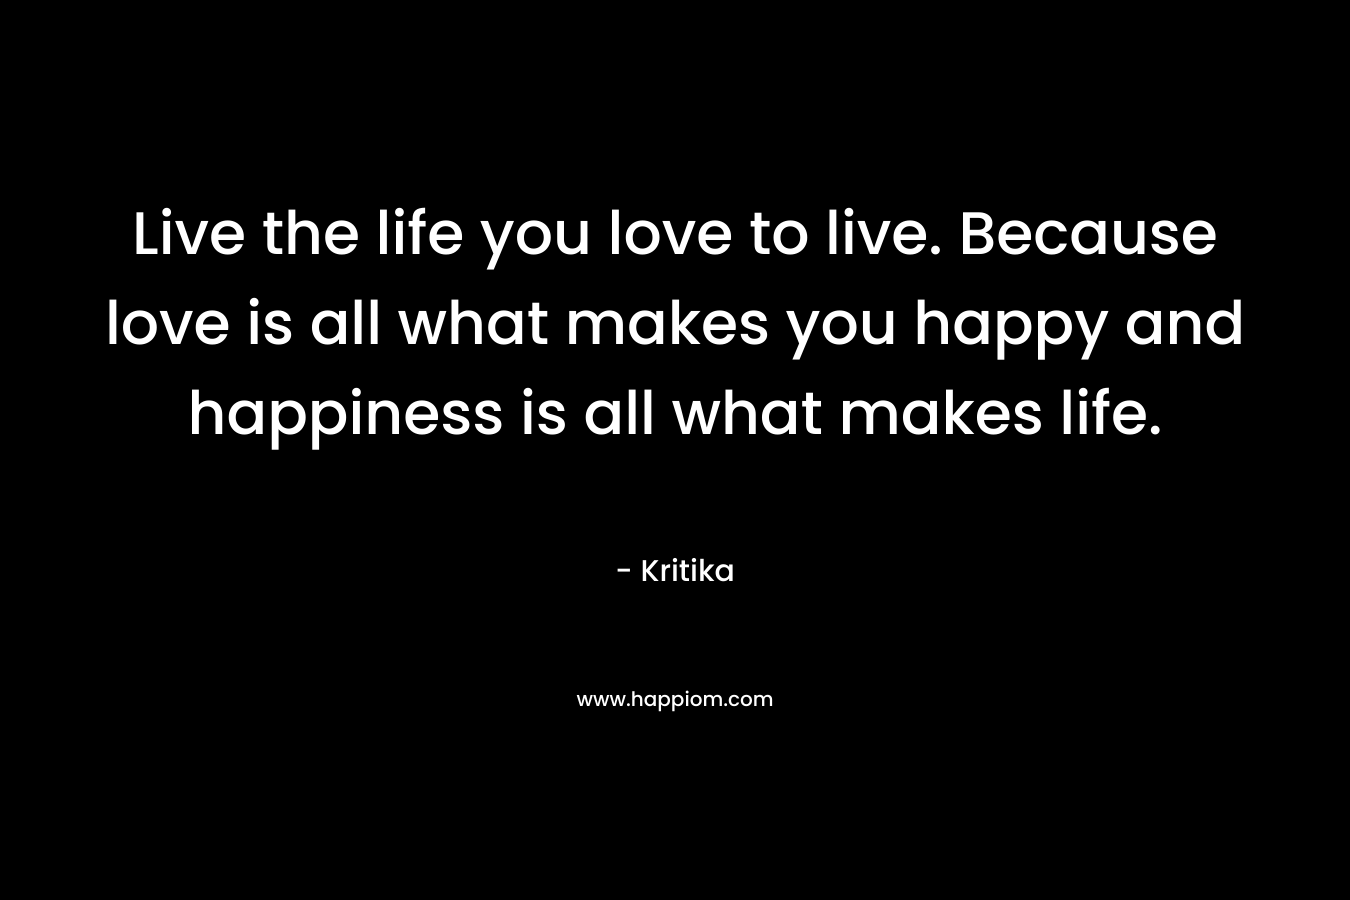 Live the life you love to live. Because love is all what makes you happy and happiness is all what makes life.